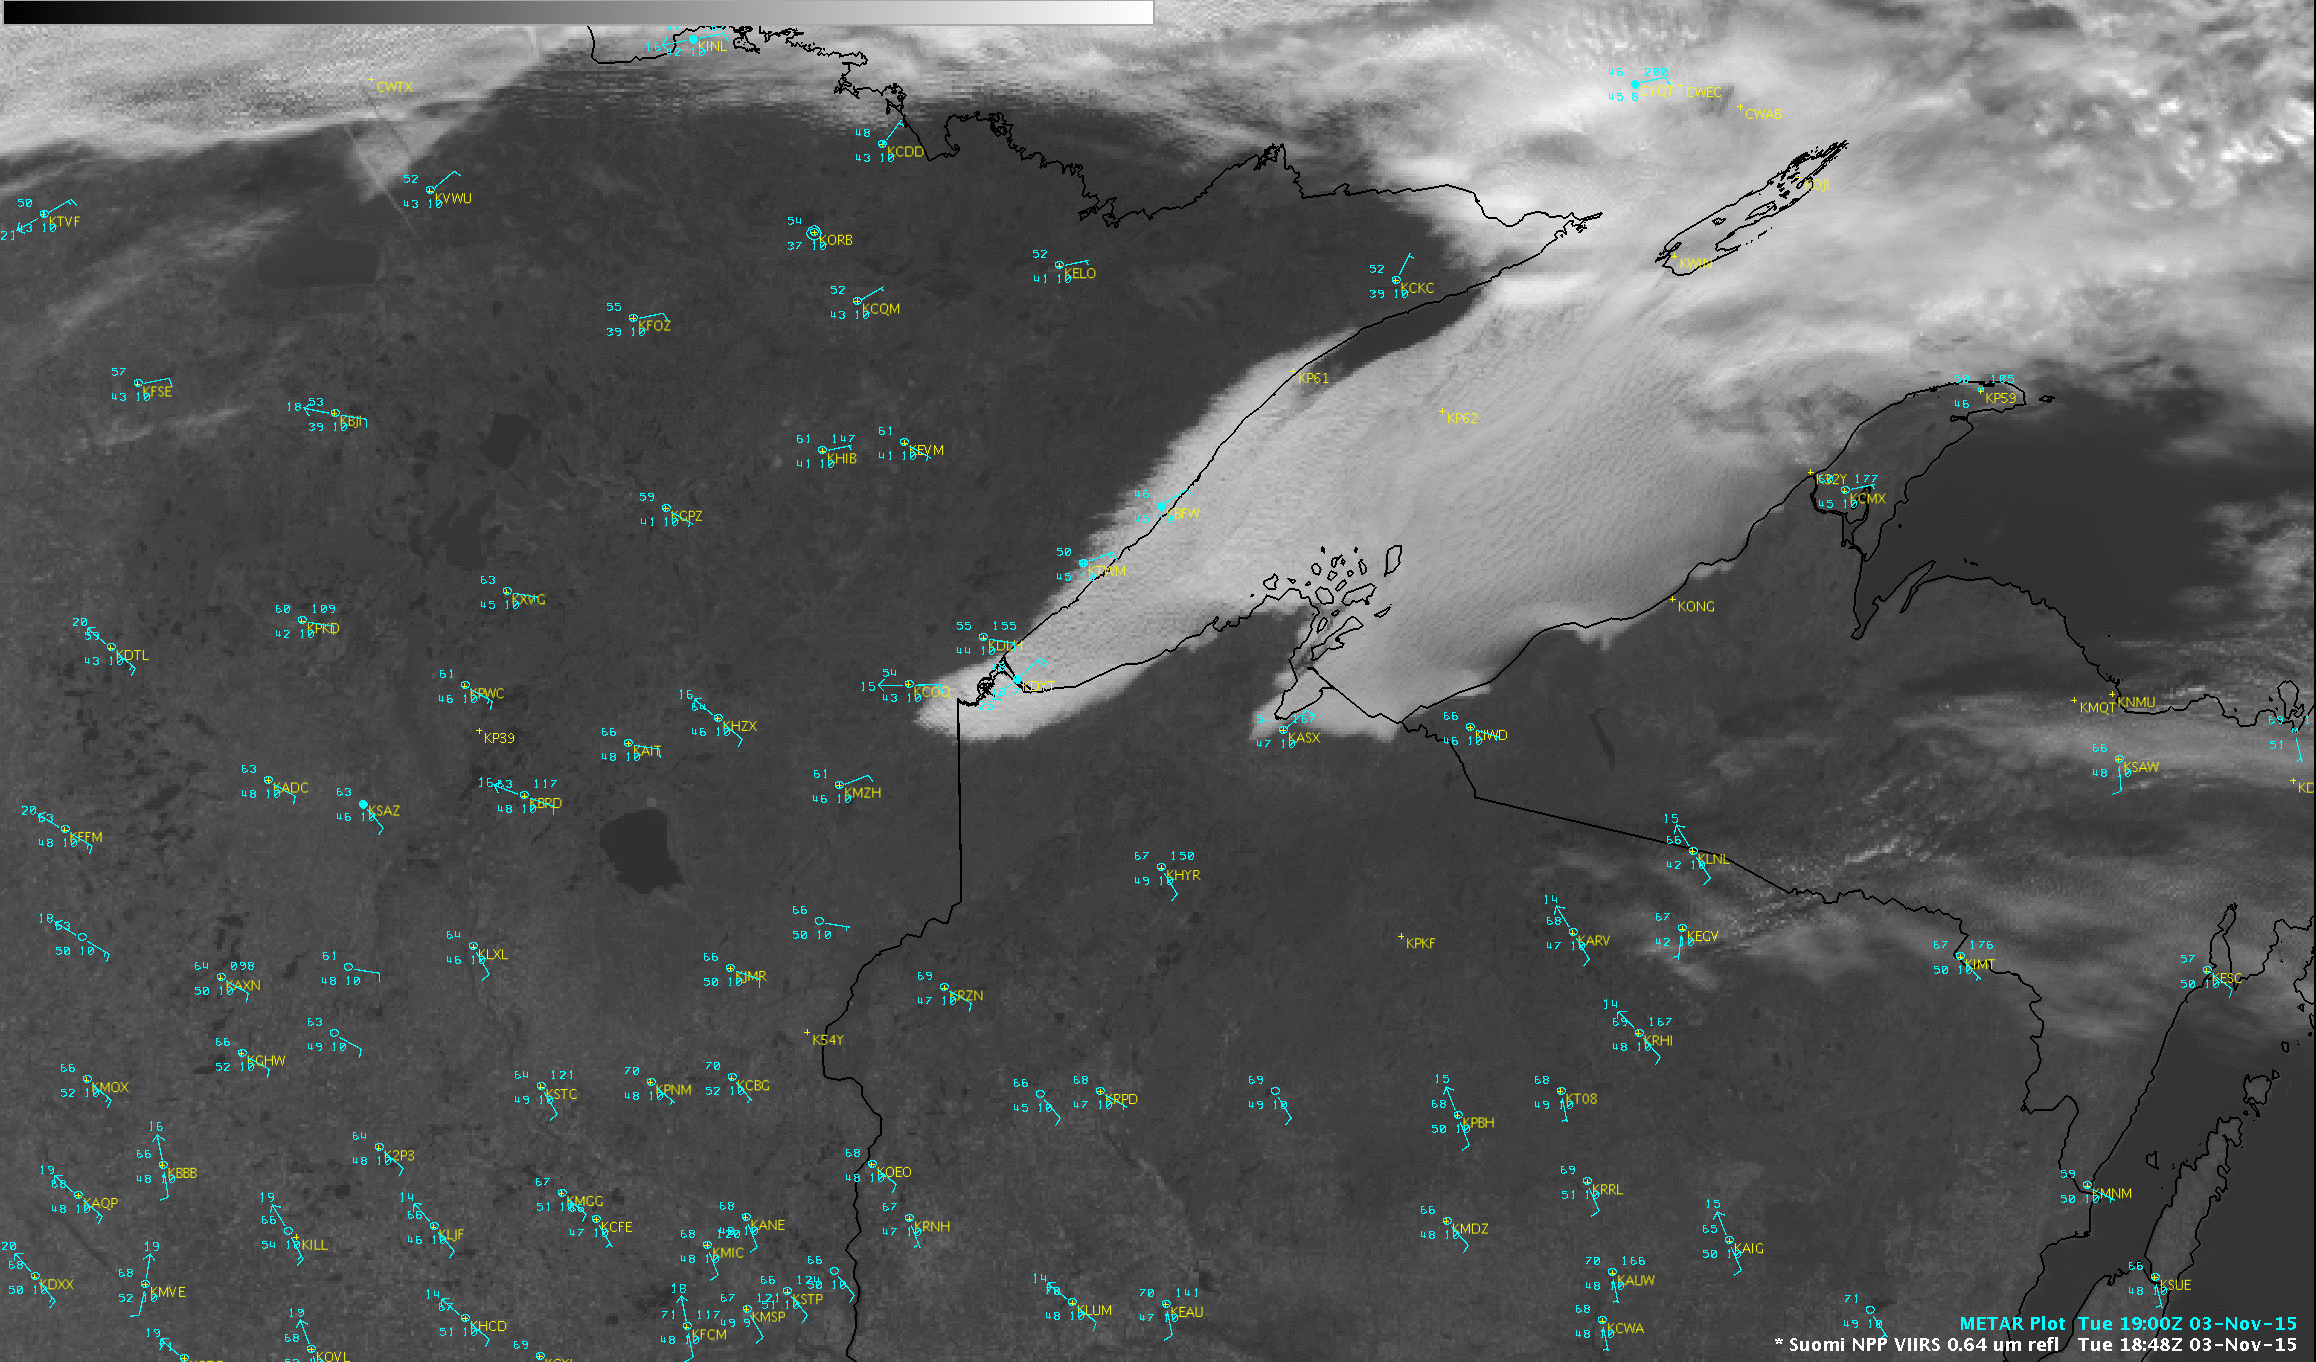 Suomi NPP VIIRS Visible (0.64 µm) image with METAR surface reports, RTMA surface winds, and surface frontal analysis [click to enlarge]